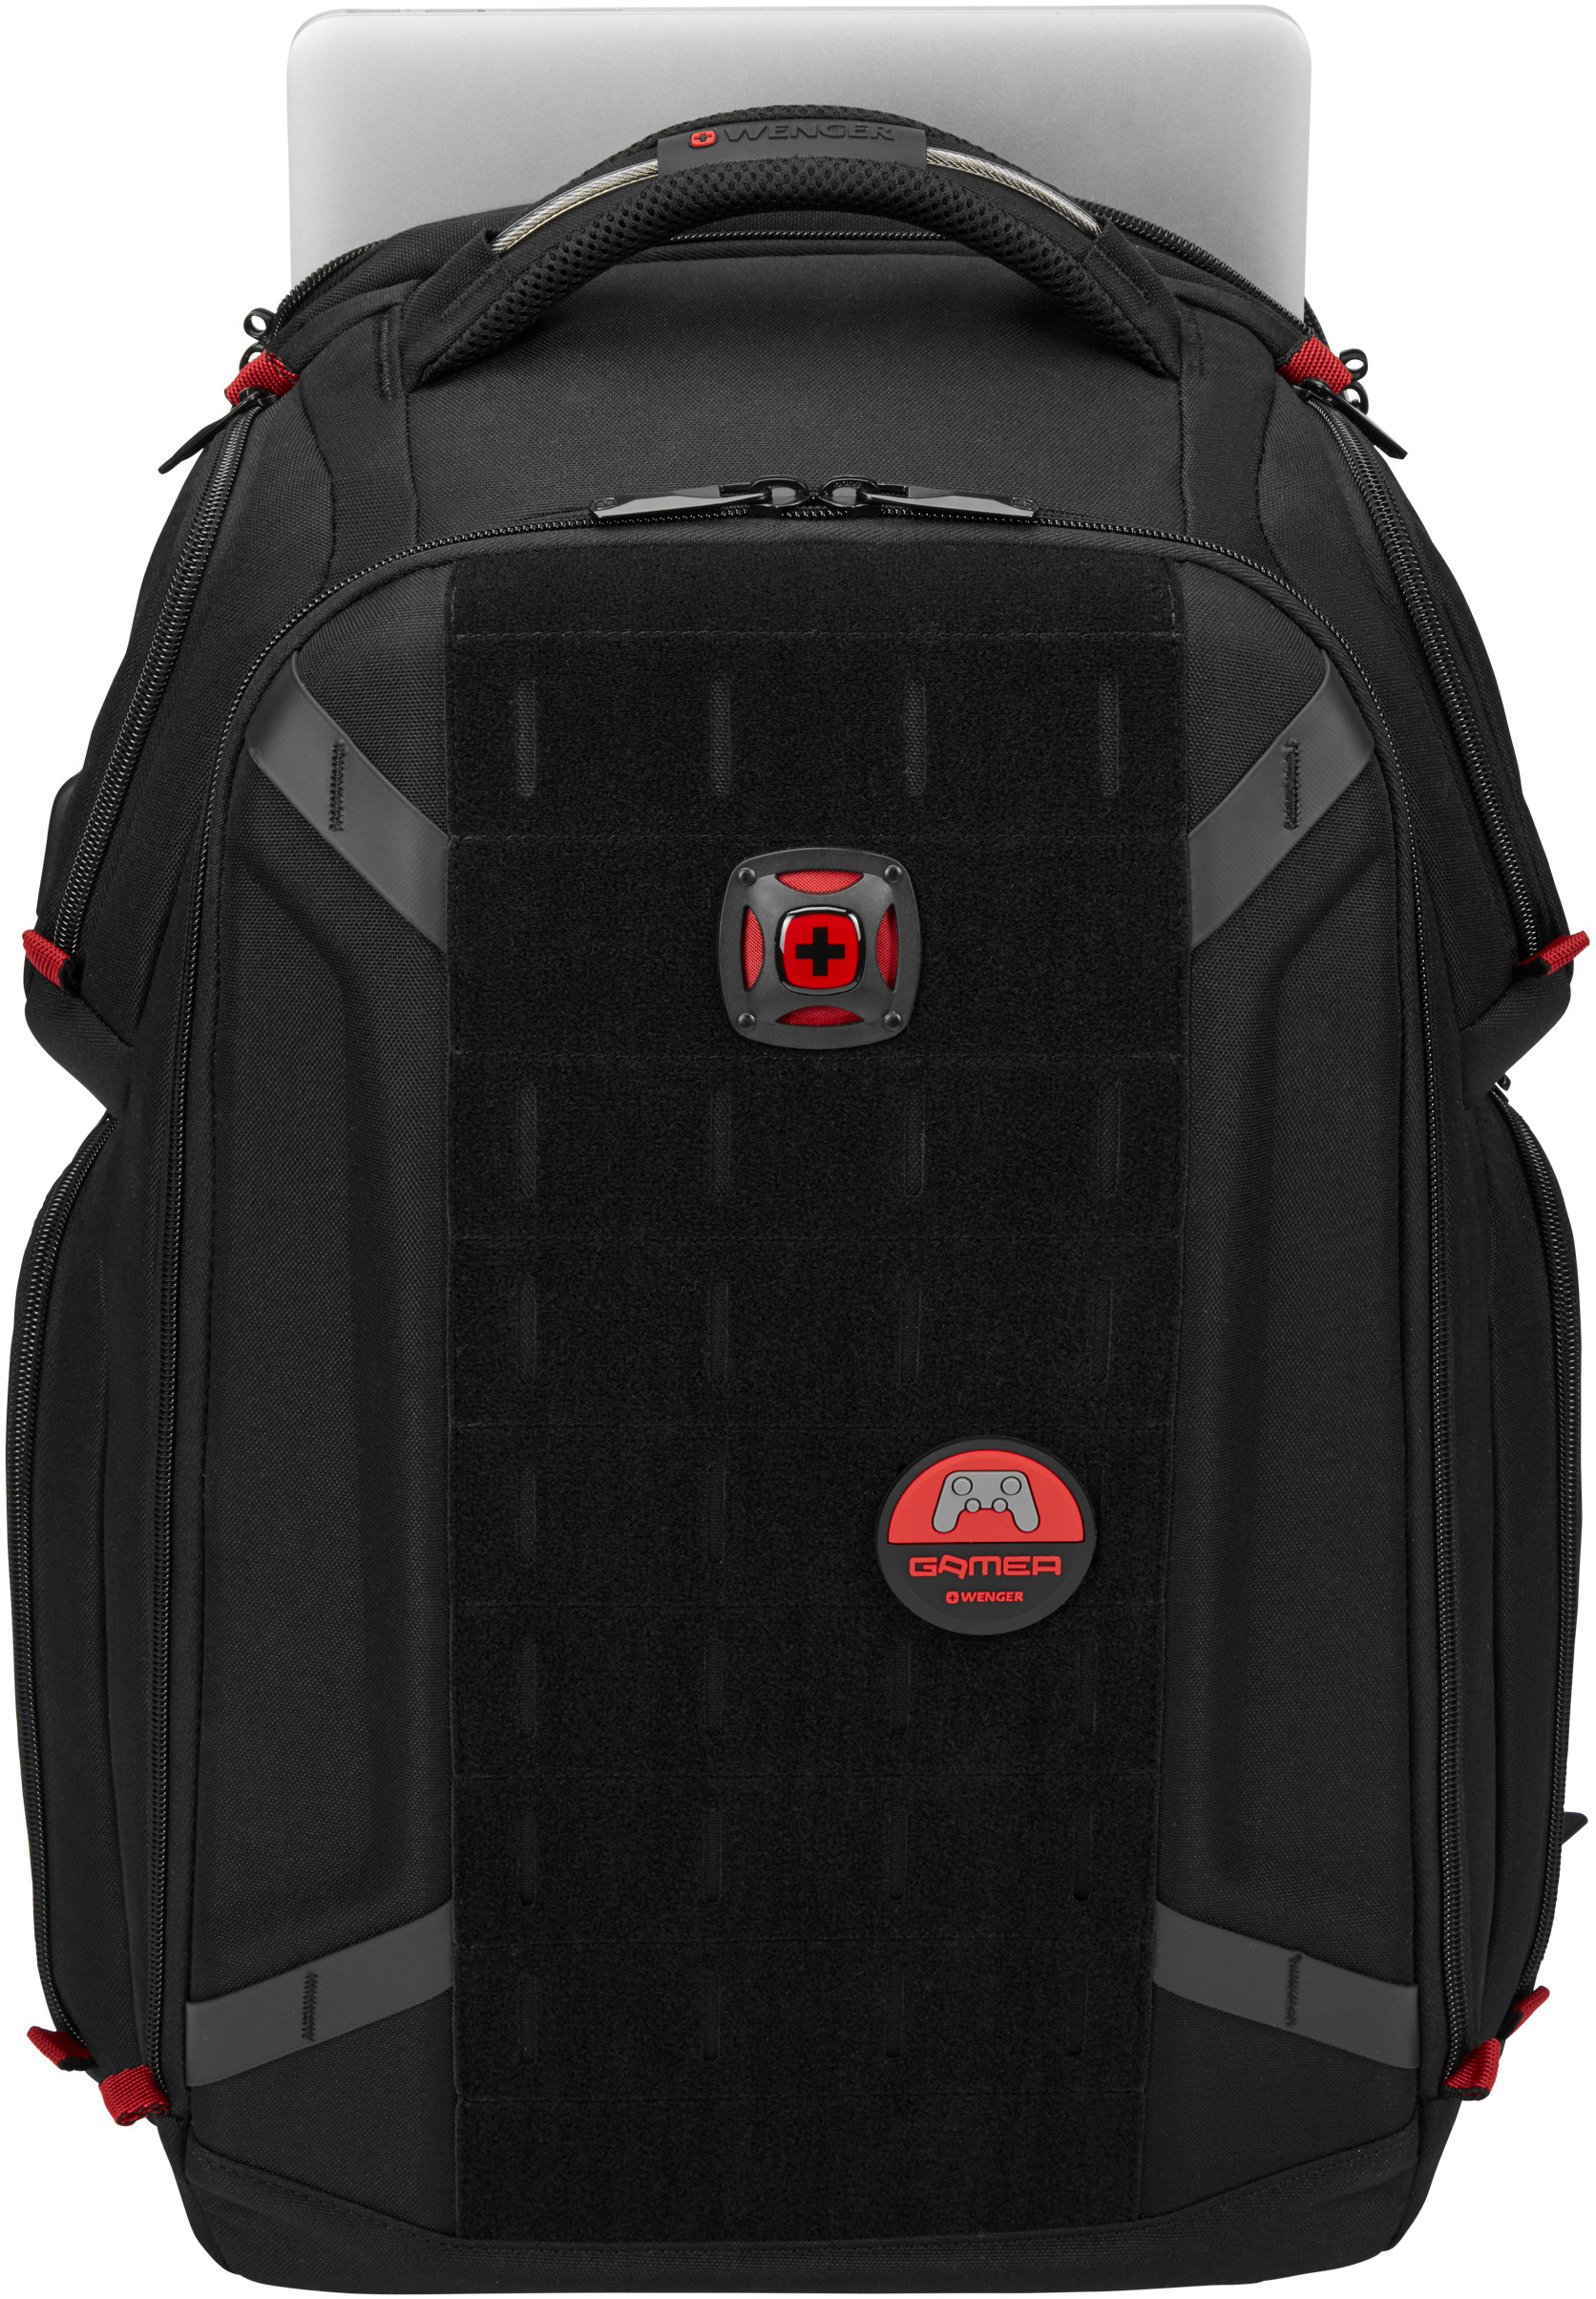 WENGER PlayerOne 17.3 inch 611650 Gaming Laptop Backpack